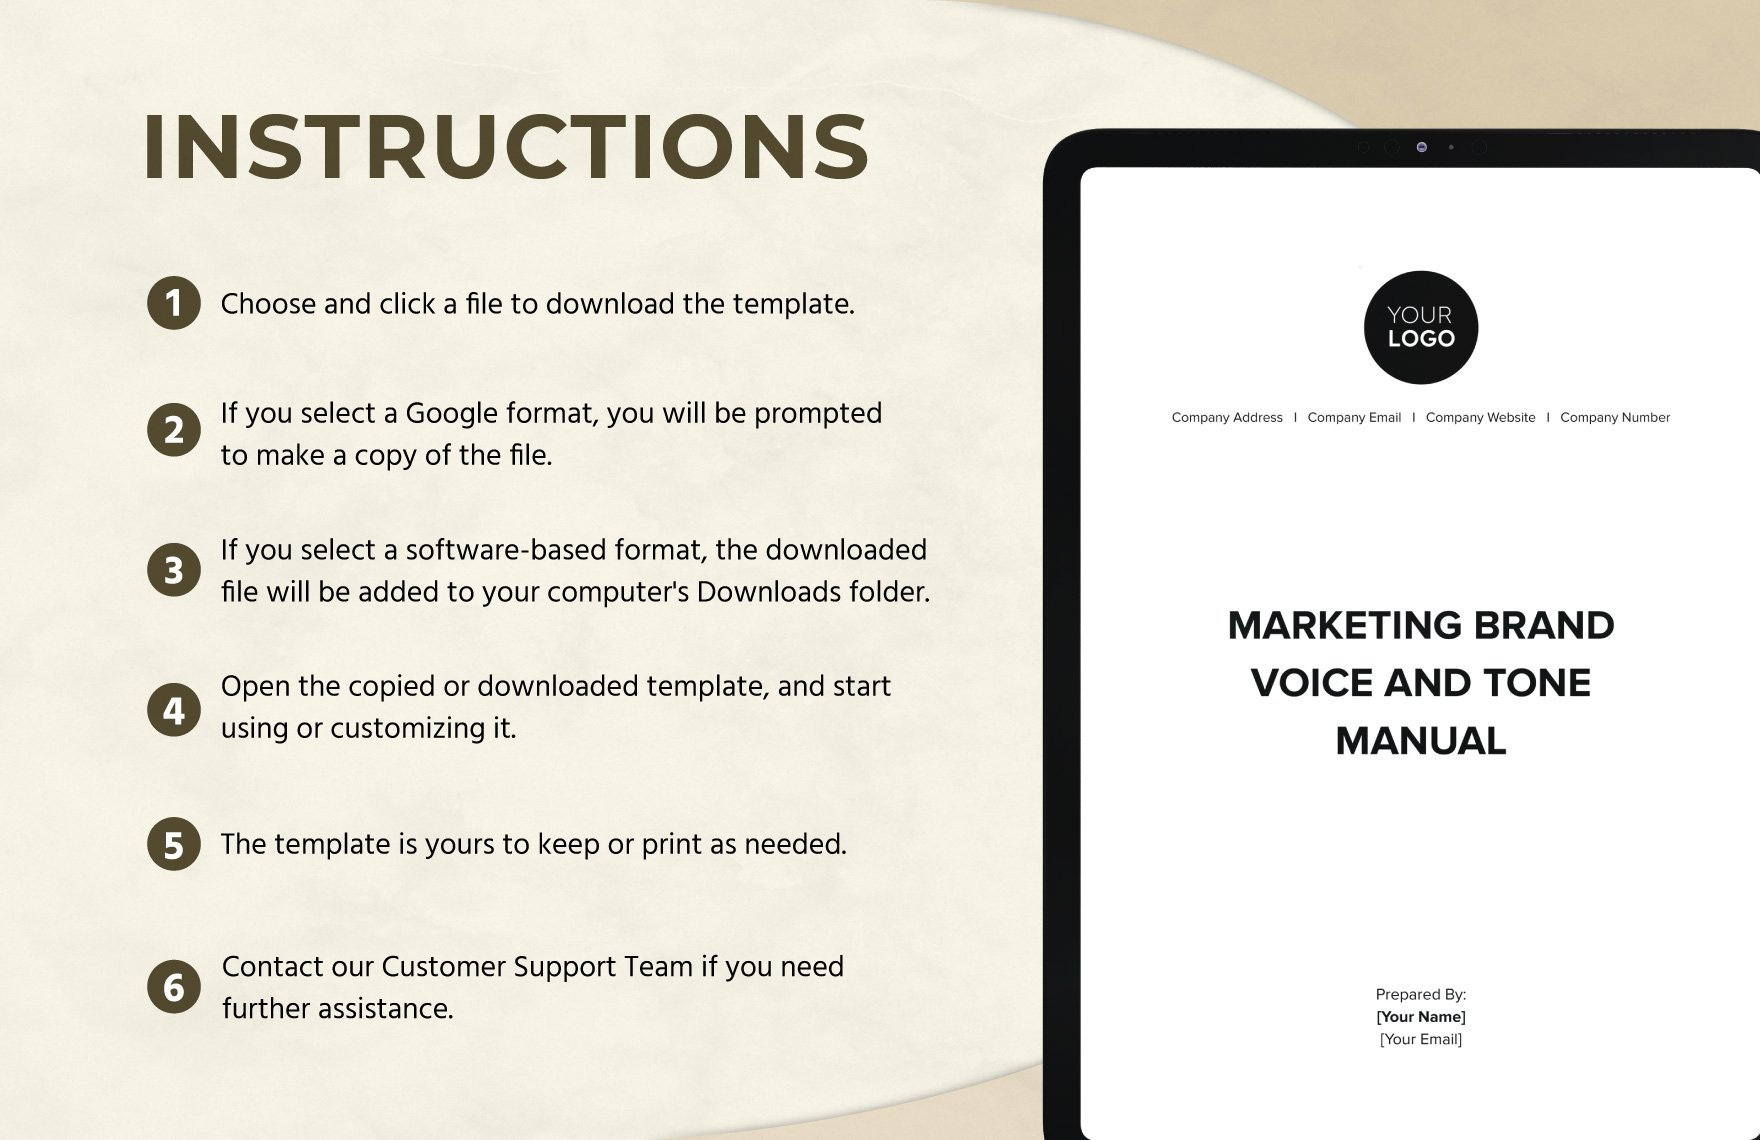 Marketing Brand Voice and Tone Manual Template